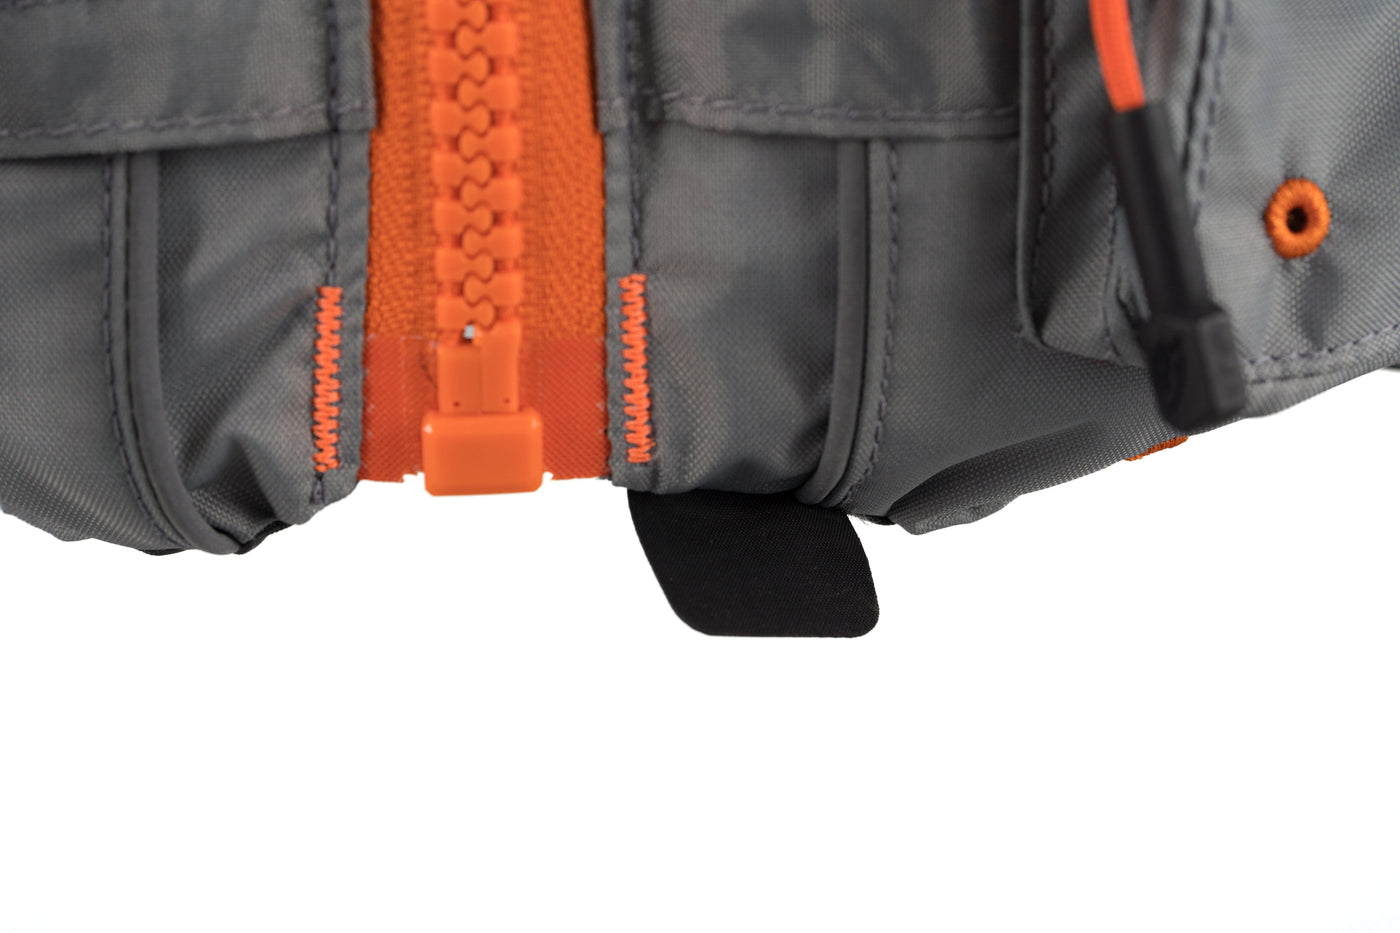 Old Town - Treble Angler Sportsman PFD Life Jacket - Silver w/ Orange Accents Accessories Old Town Canoe 